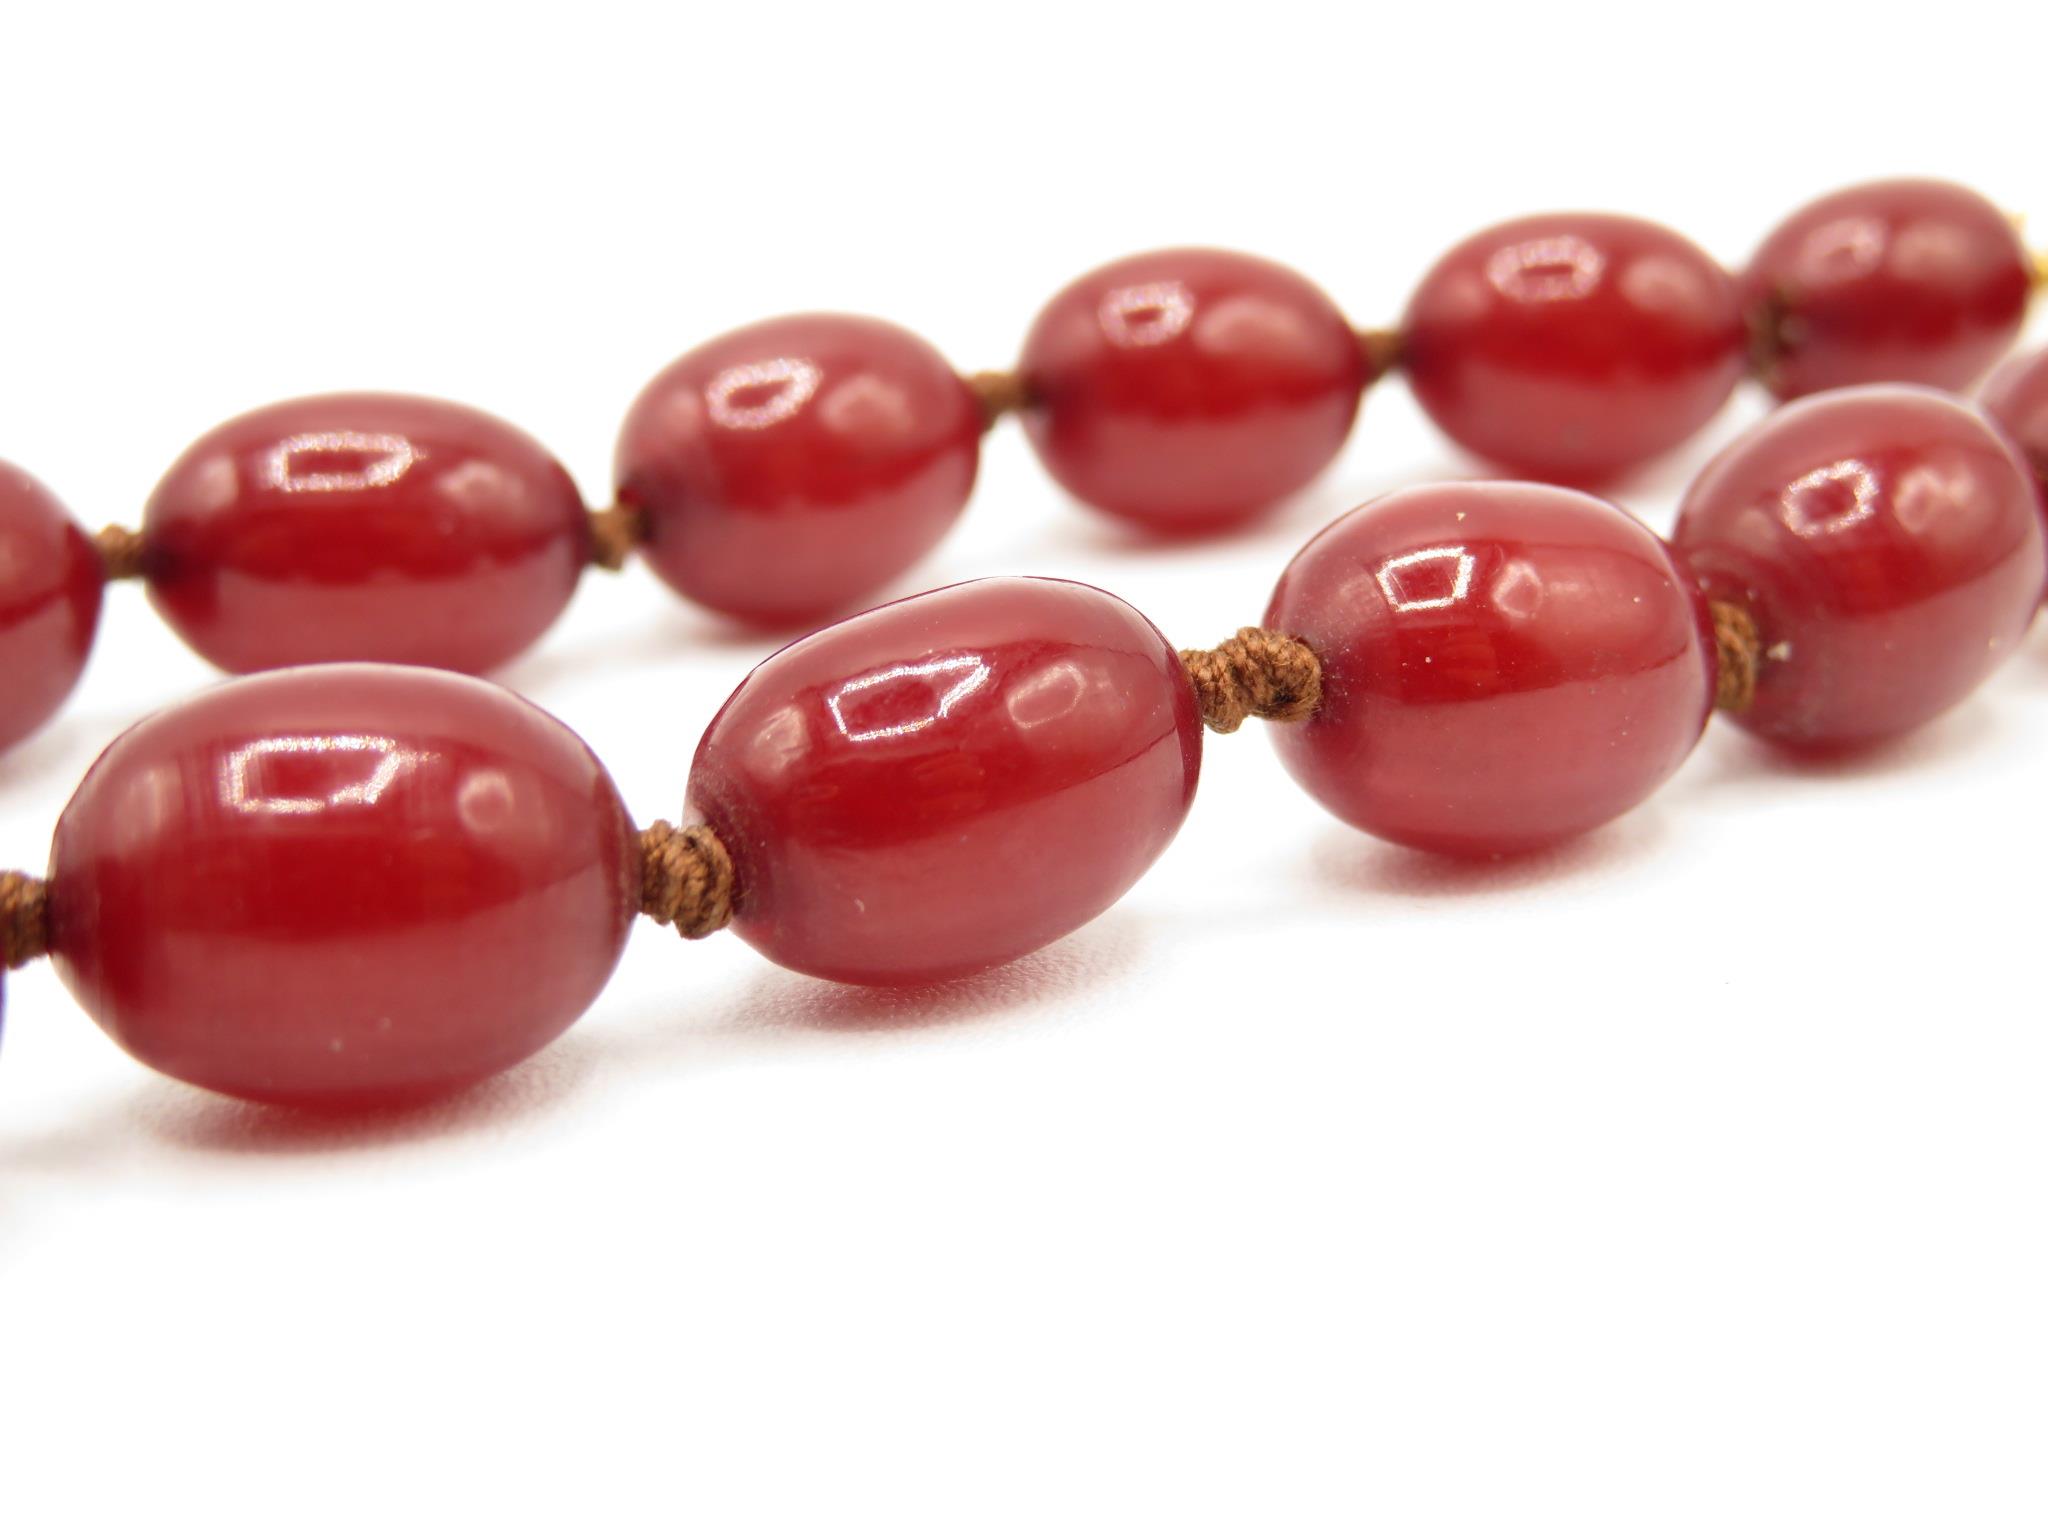 A Small Bakelite Bead Necklace With Internal Streaking - Image 3 of 4